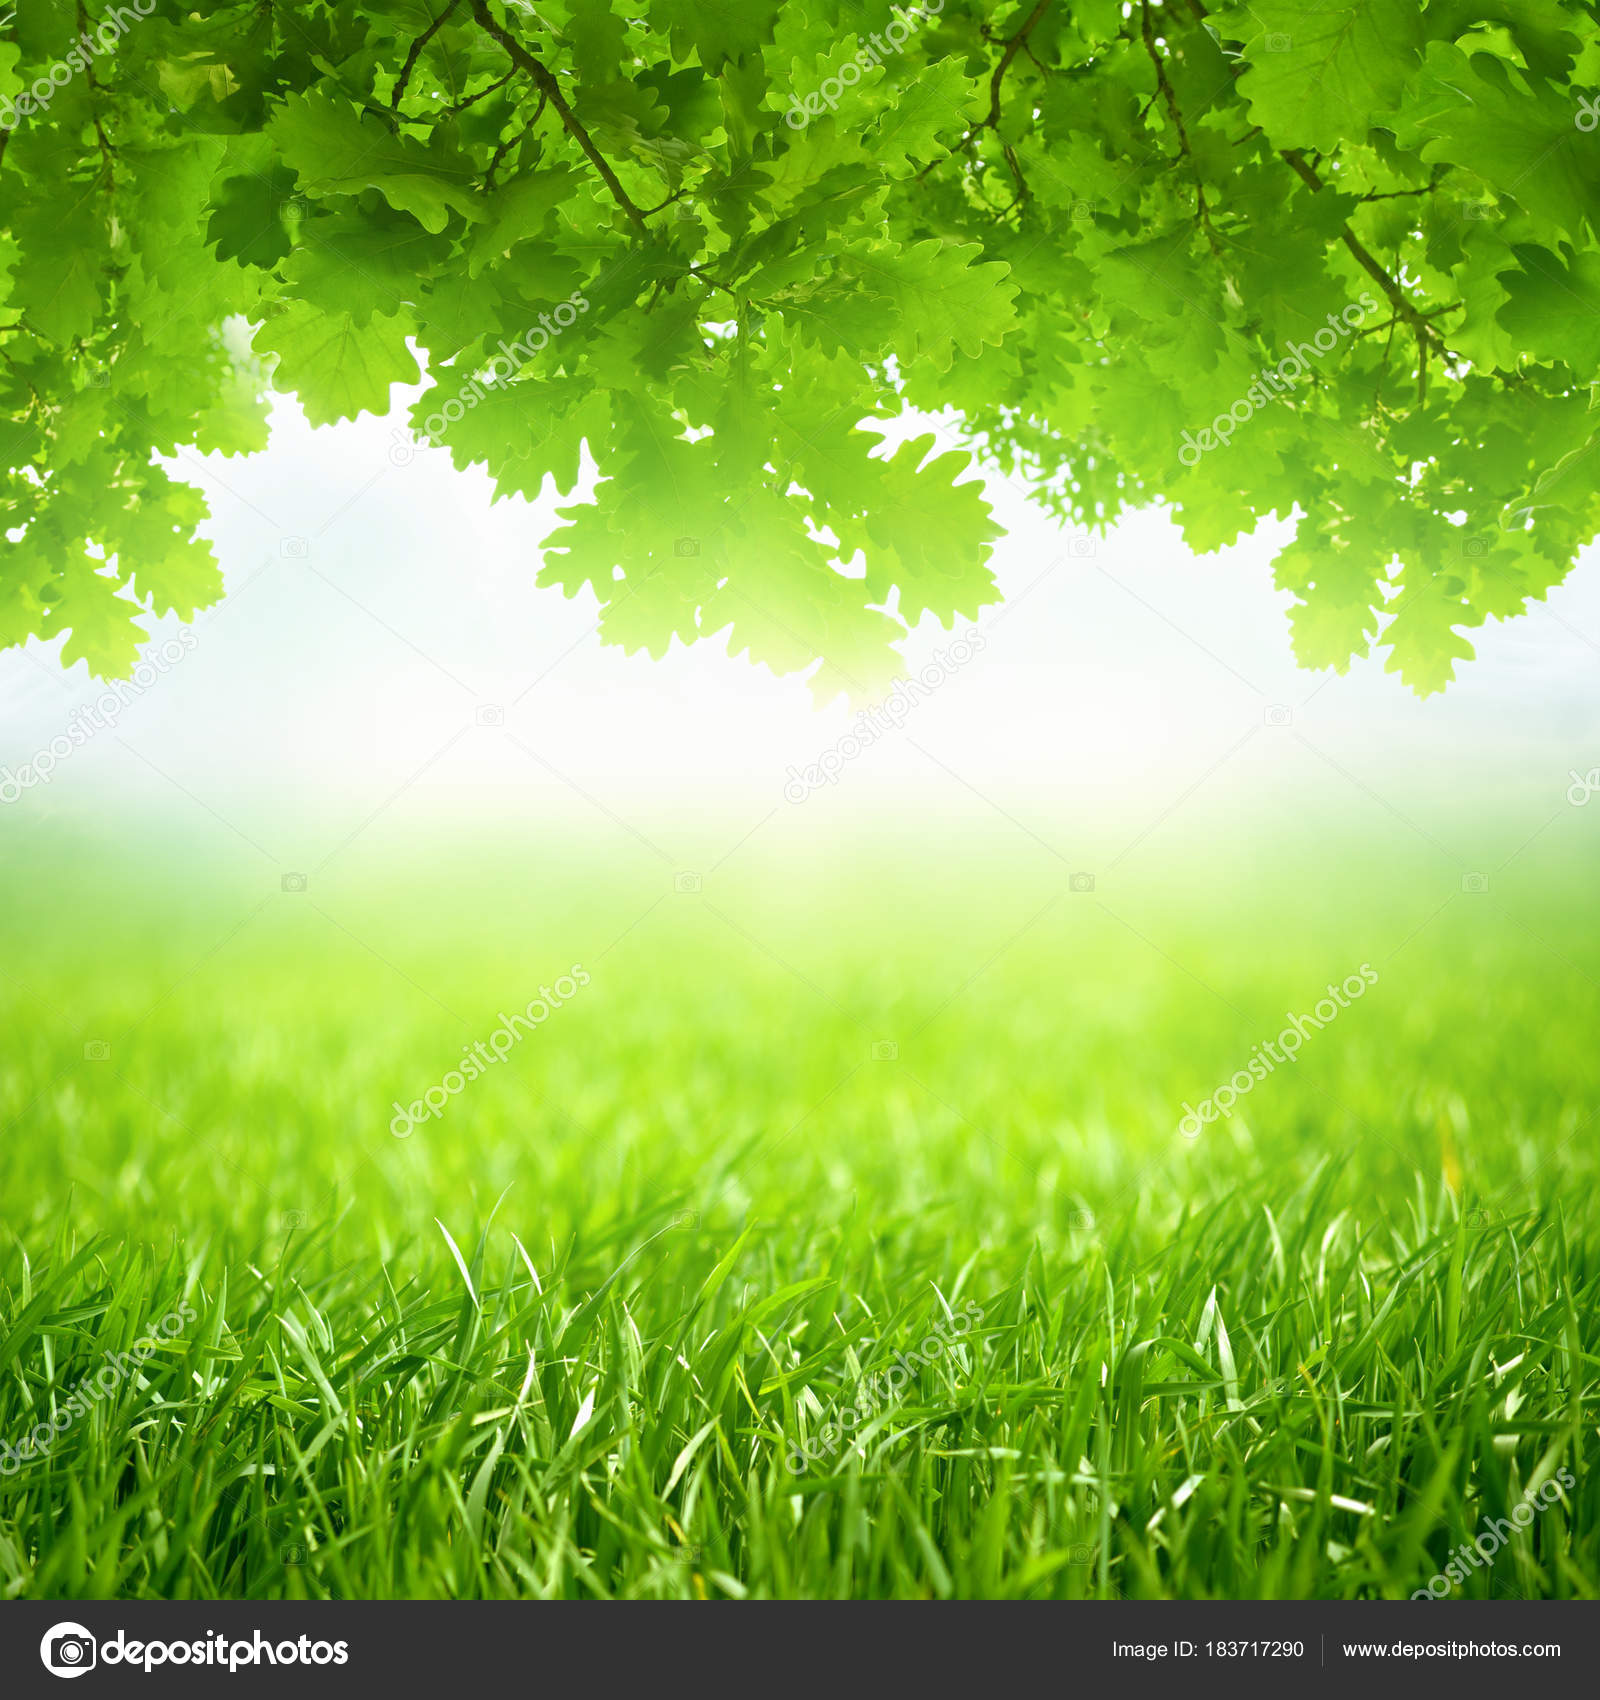 Spring seasonal background, green grass and oak leaves grows, br ...